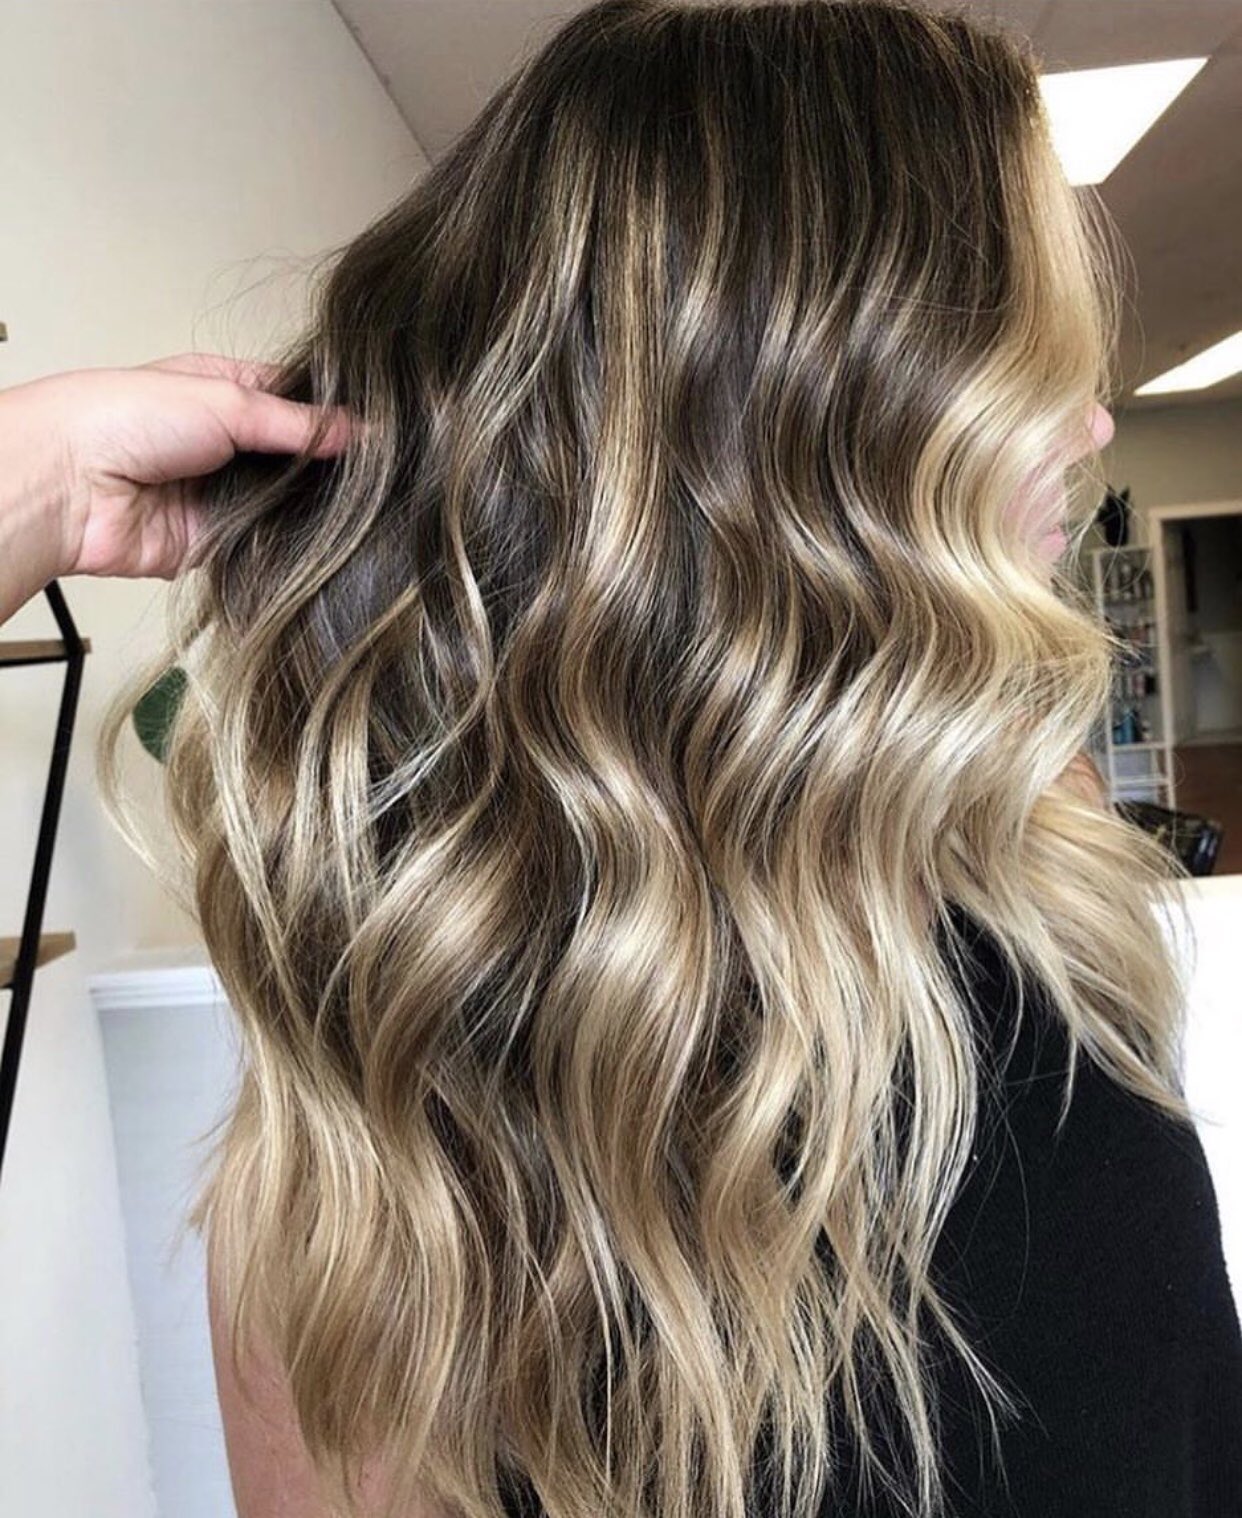 Olaplex on Twitter: "Reliving the last days of summer ☀️ with this incredible dimensional color! Anyone else lost in these healthy waves? 🌊 . Hair by: Protected with: @olaplex #olaplex #balayage #